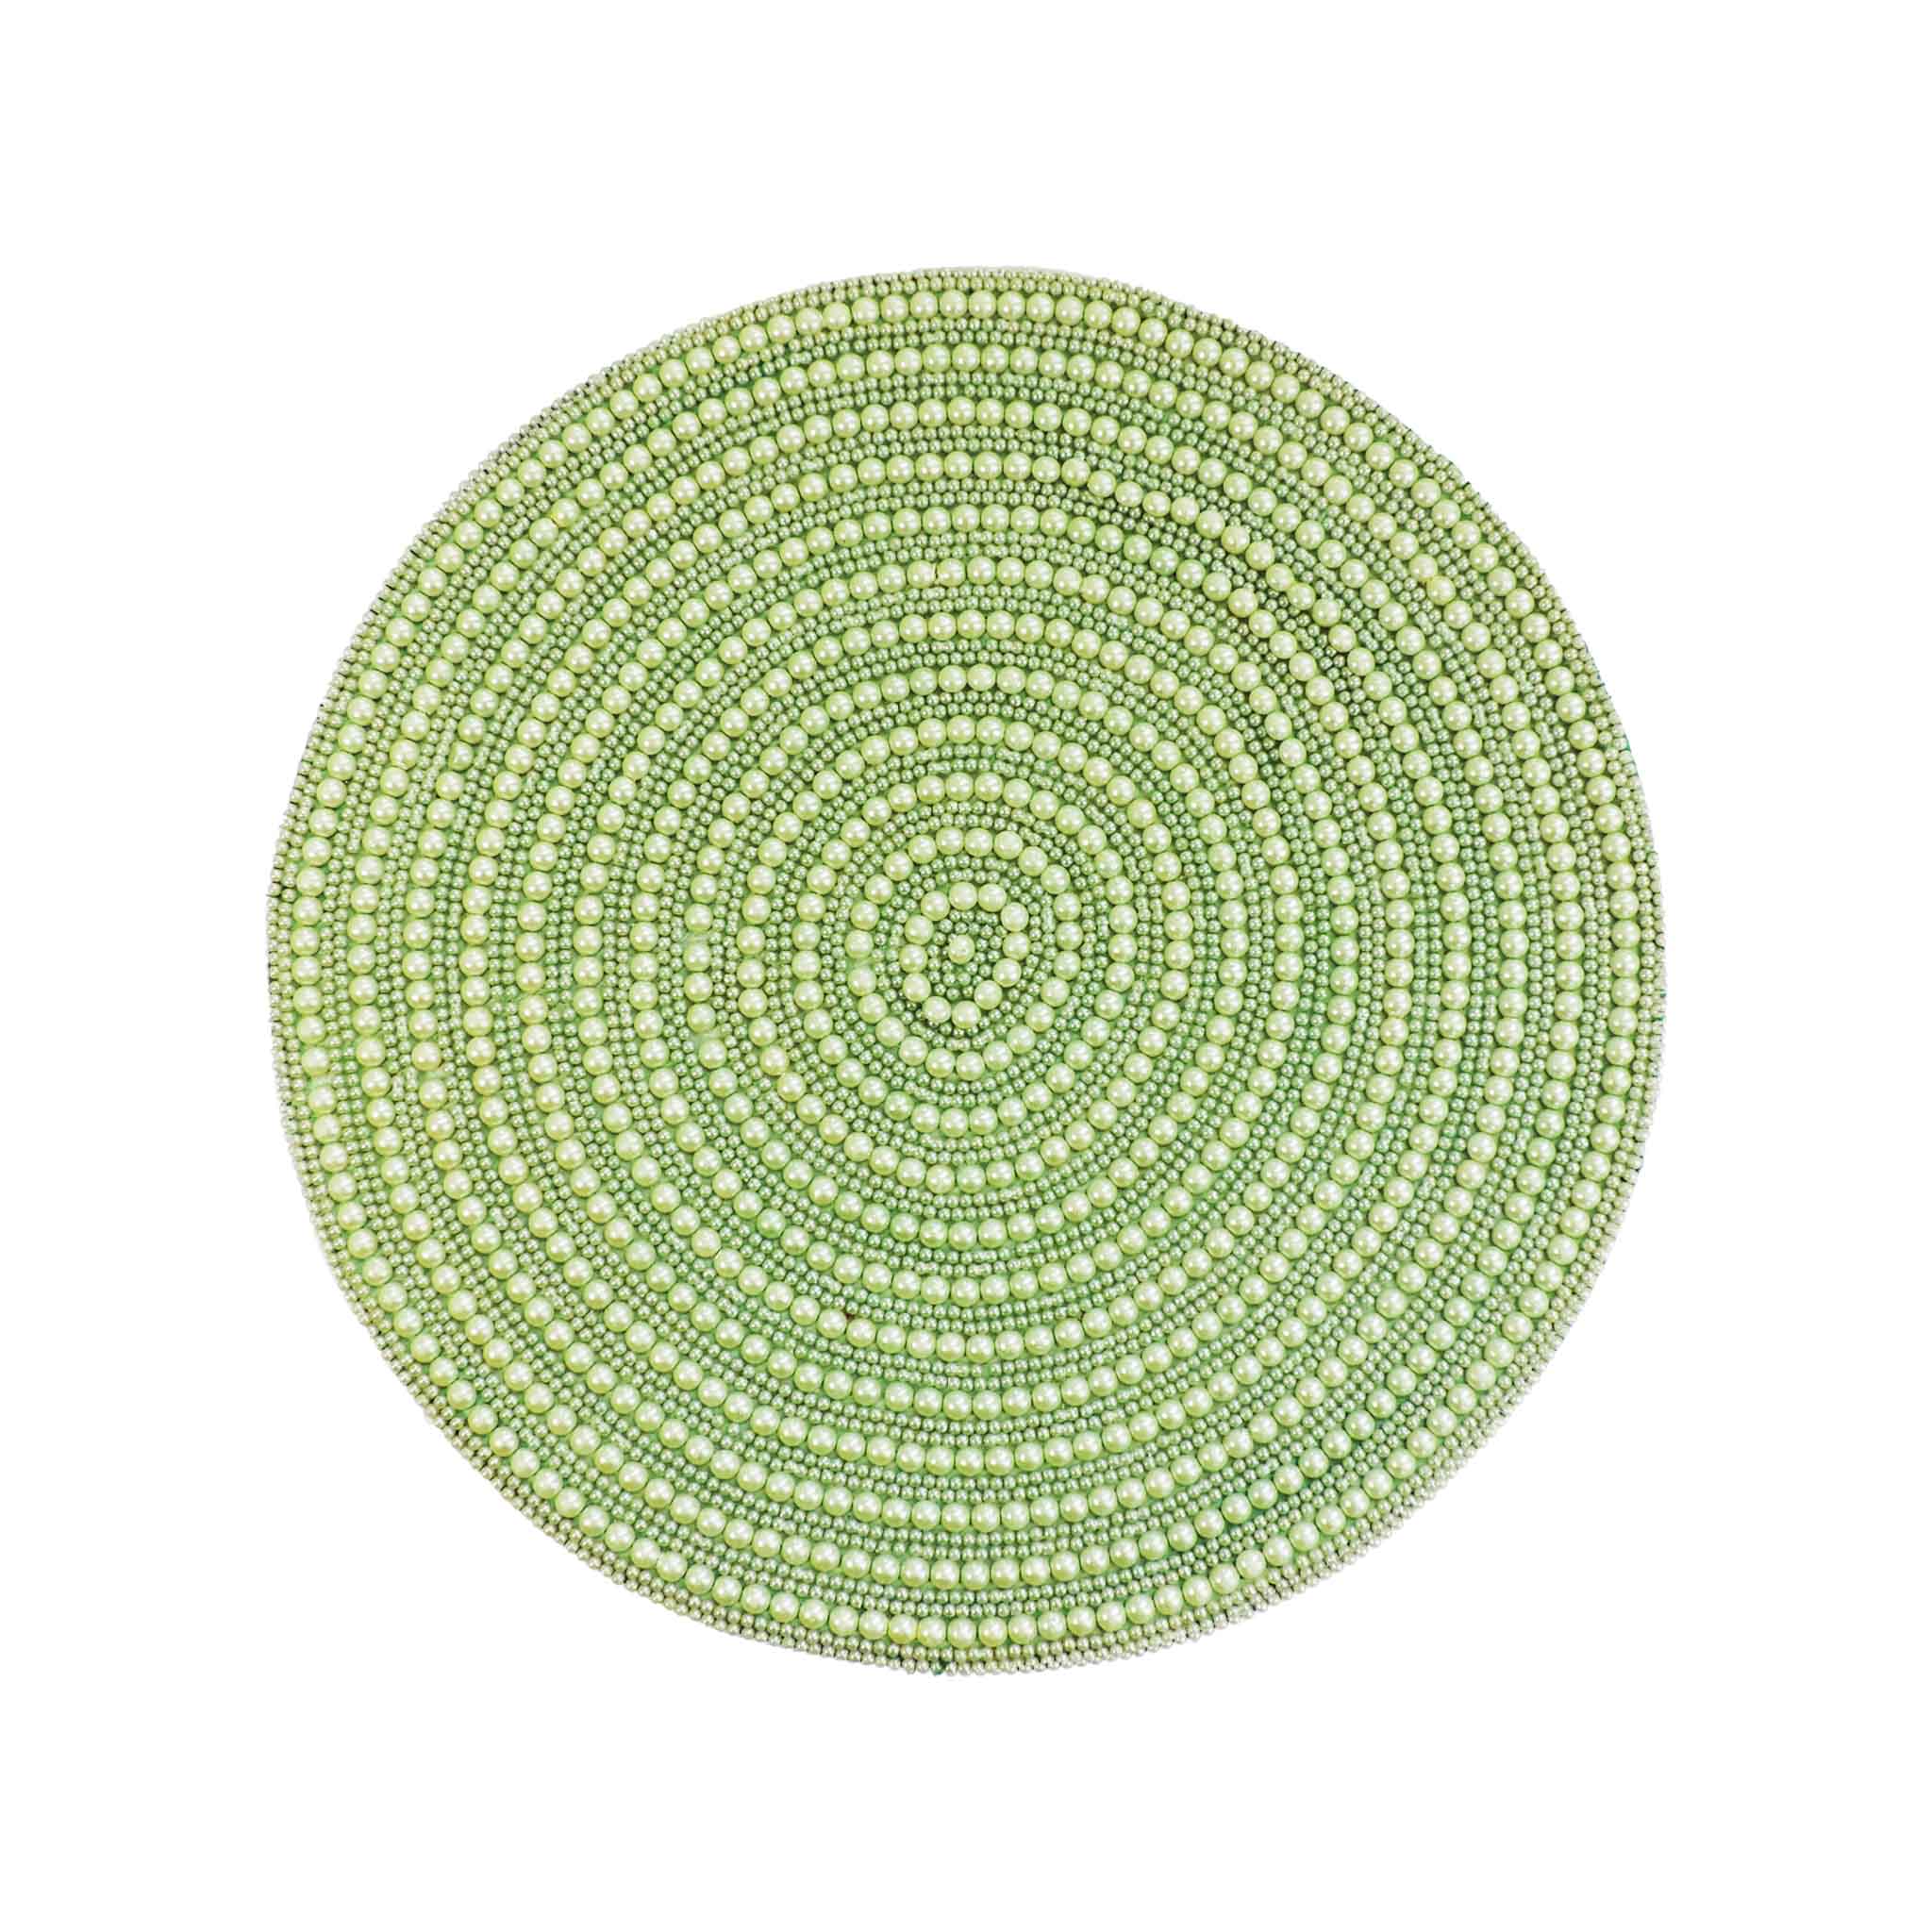 Whirl Bead Embroidered Placemat in Light Green, Set of 2/4